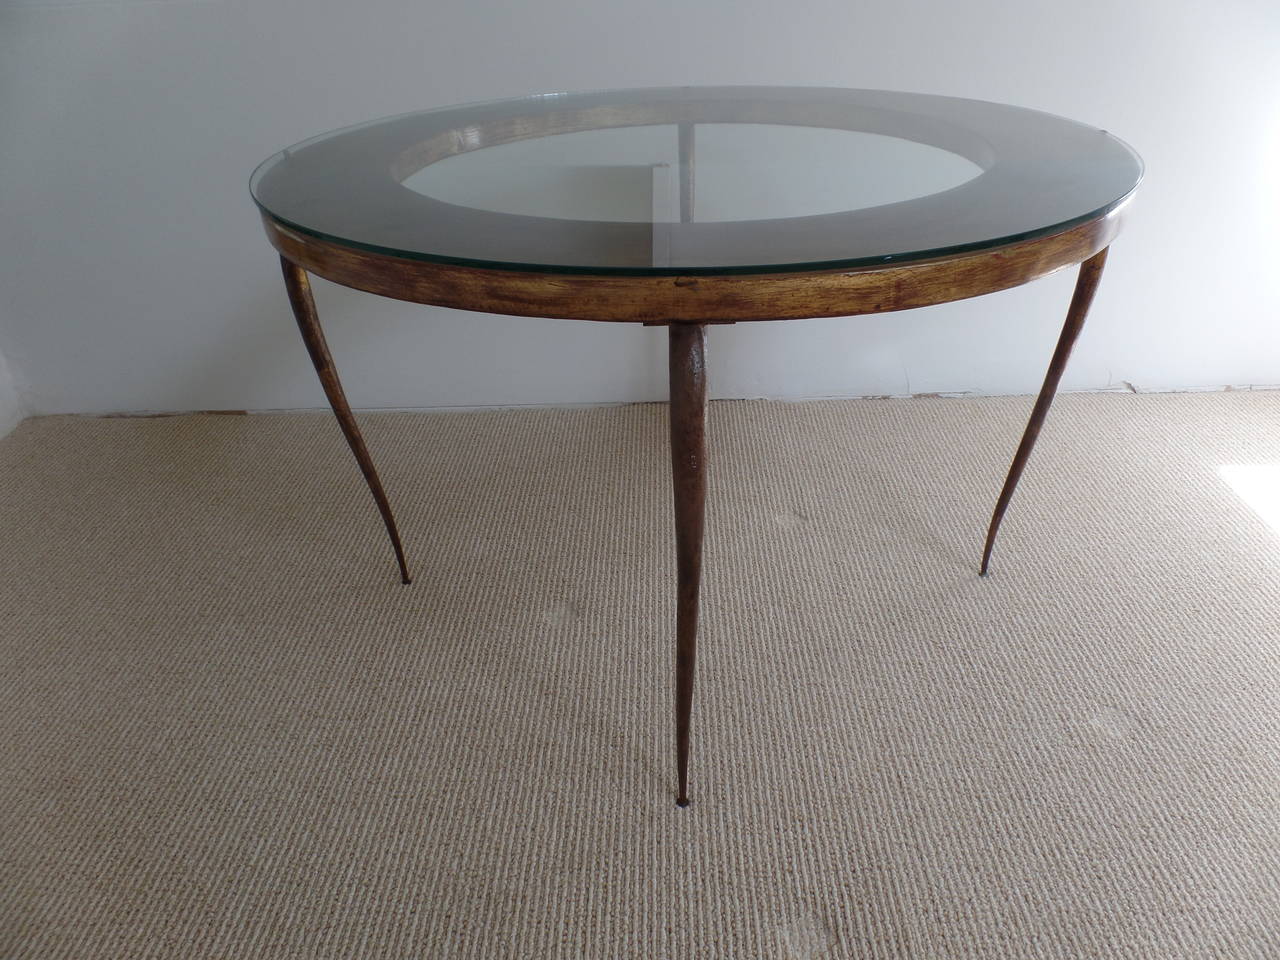 An elegant and timeless round French Mid-Century Modern Neoclassical cocktail table by Rene Prou with stunning, delicately hand-hammered tapering legs. The legs and frame are delicately gilt with the worn patina of the legs adding to the subtle